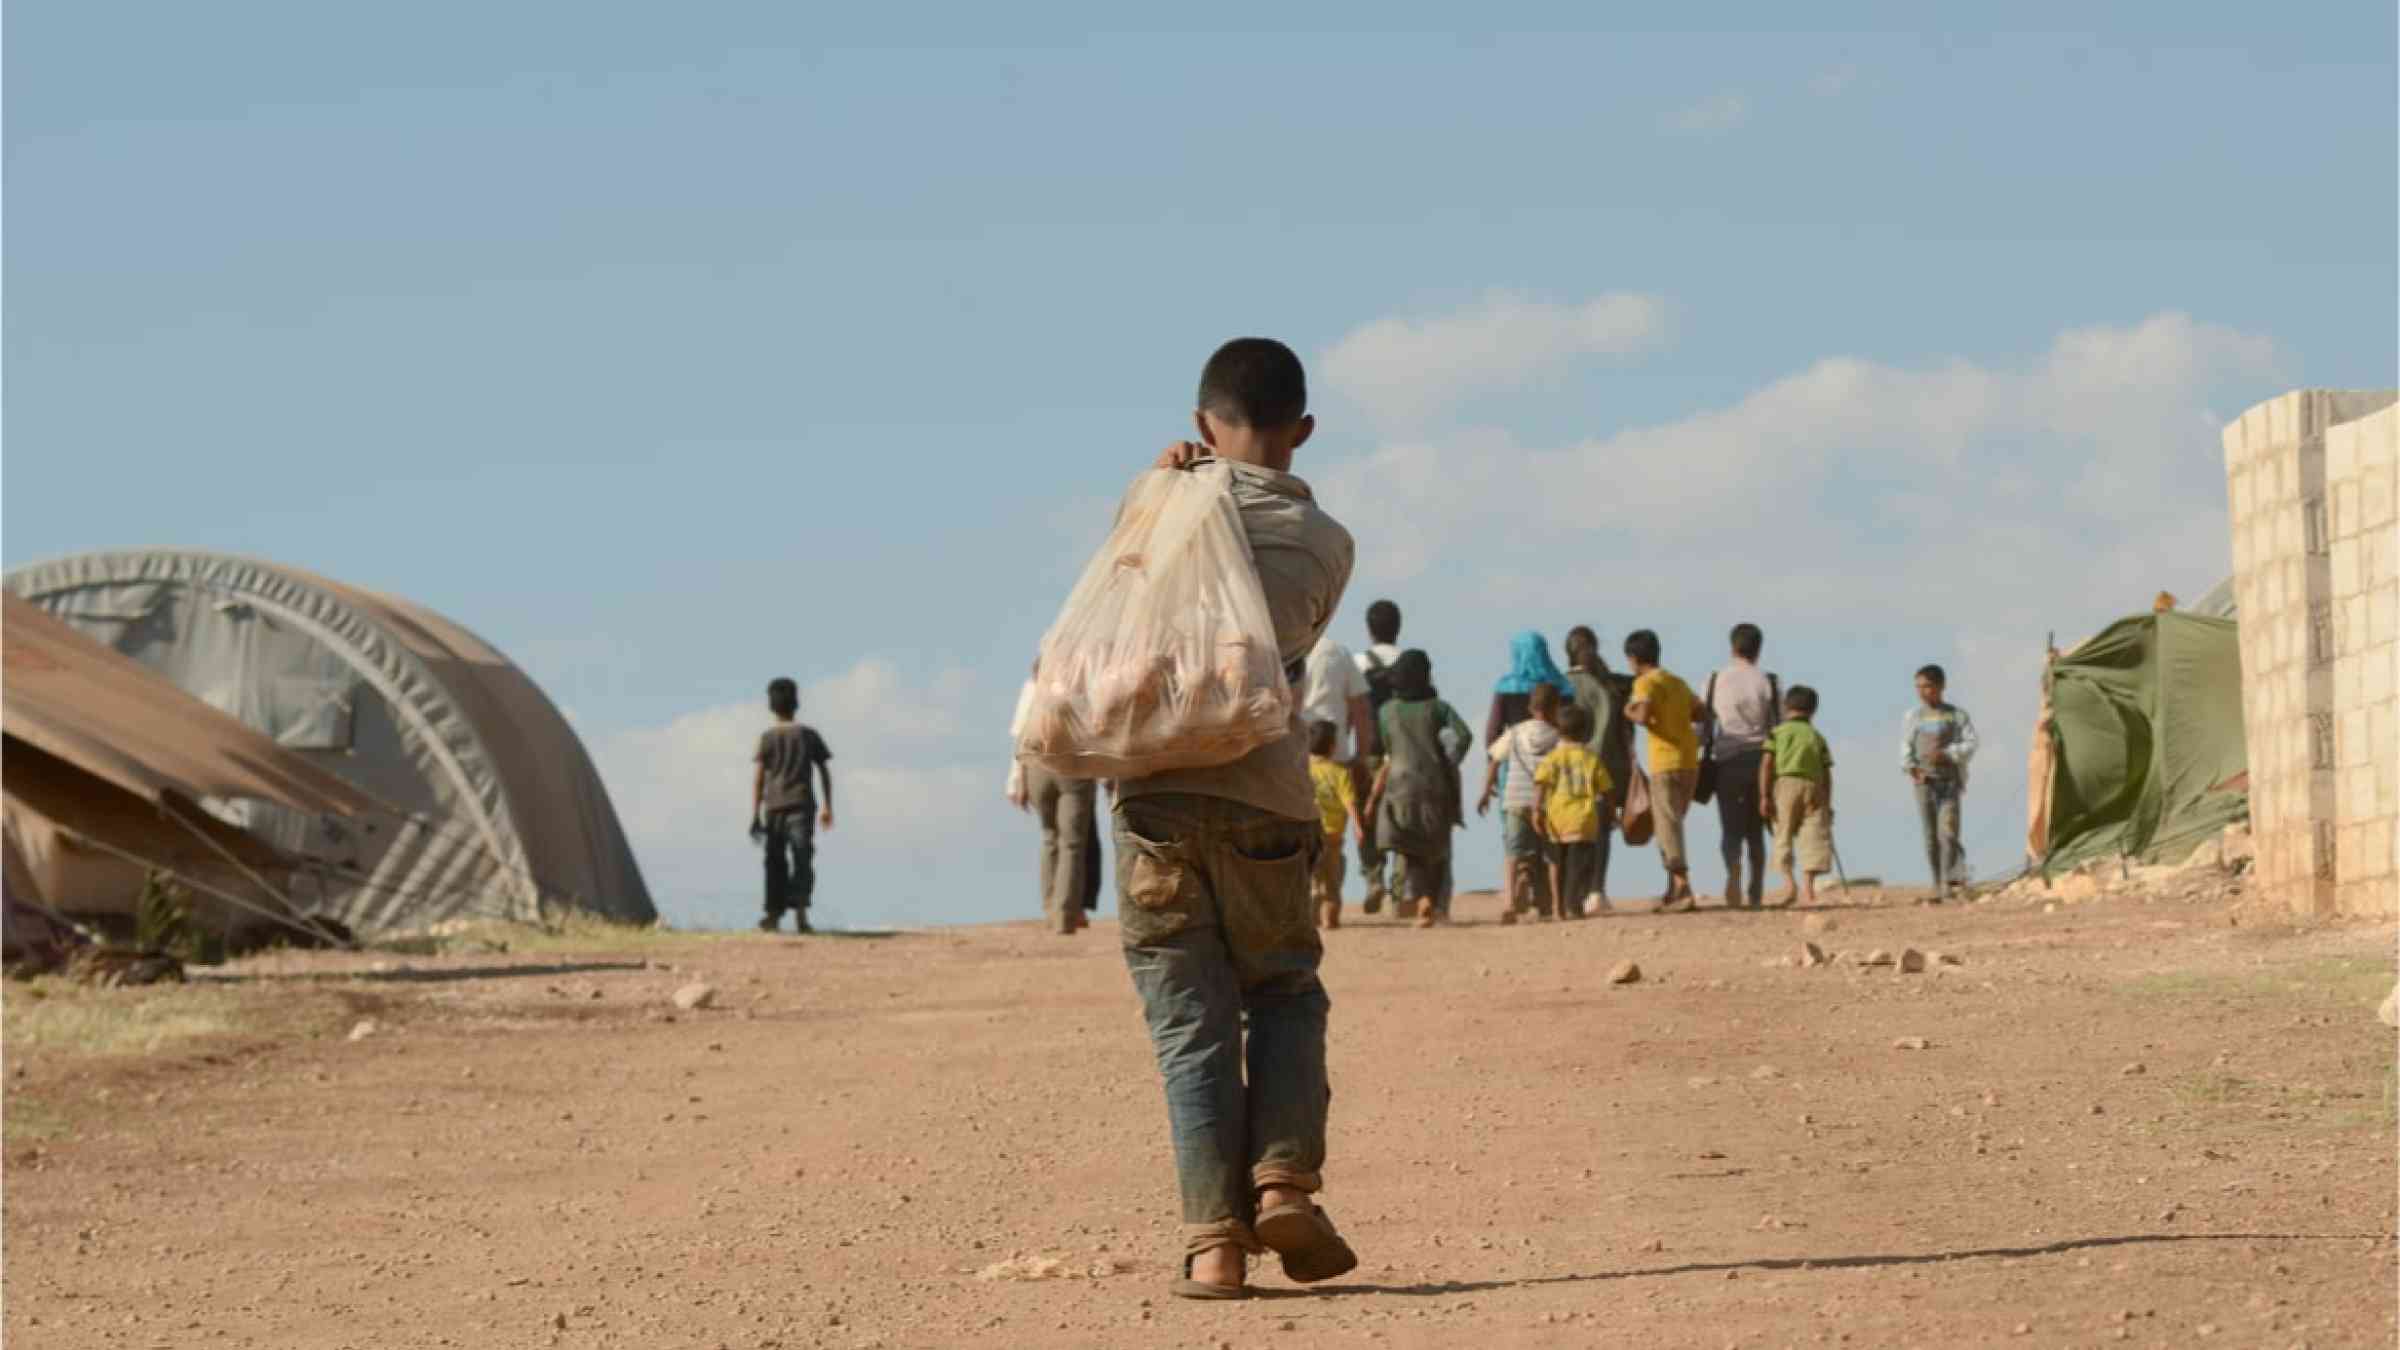 A young boy walking across a refugee camp in Syria.